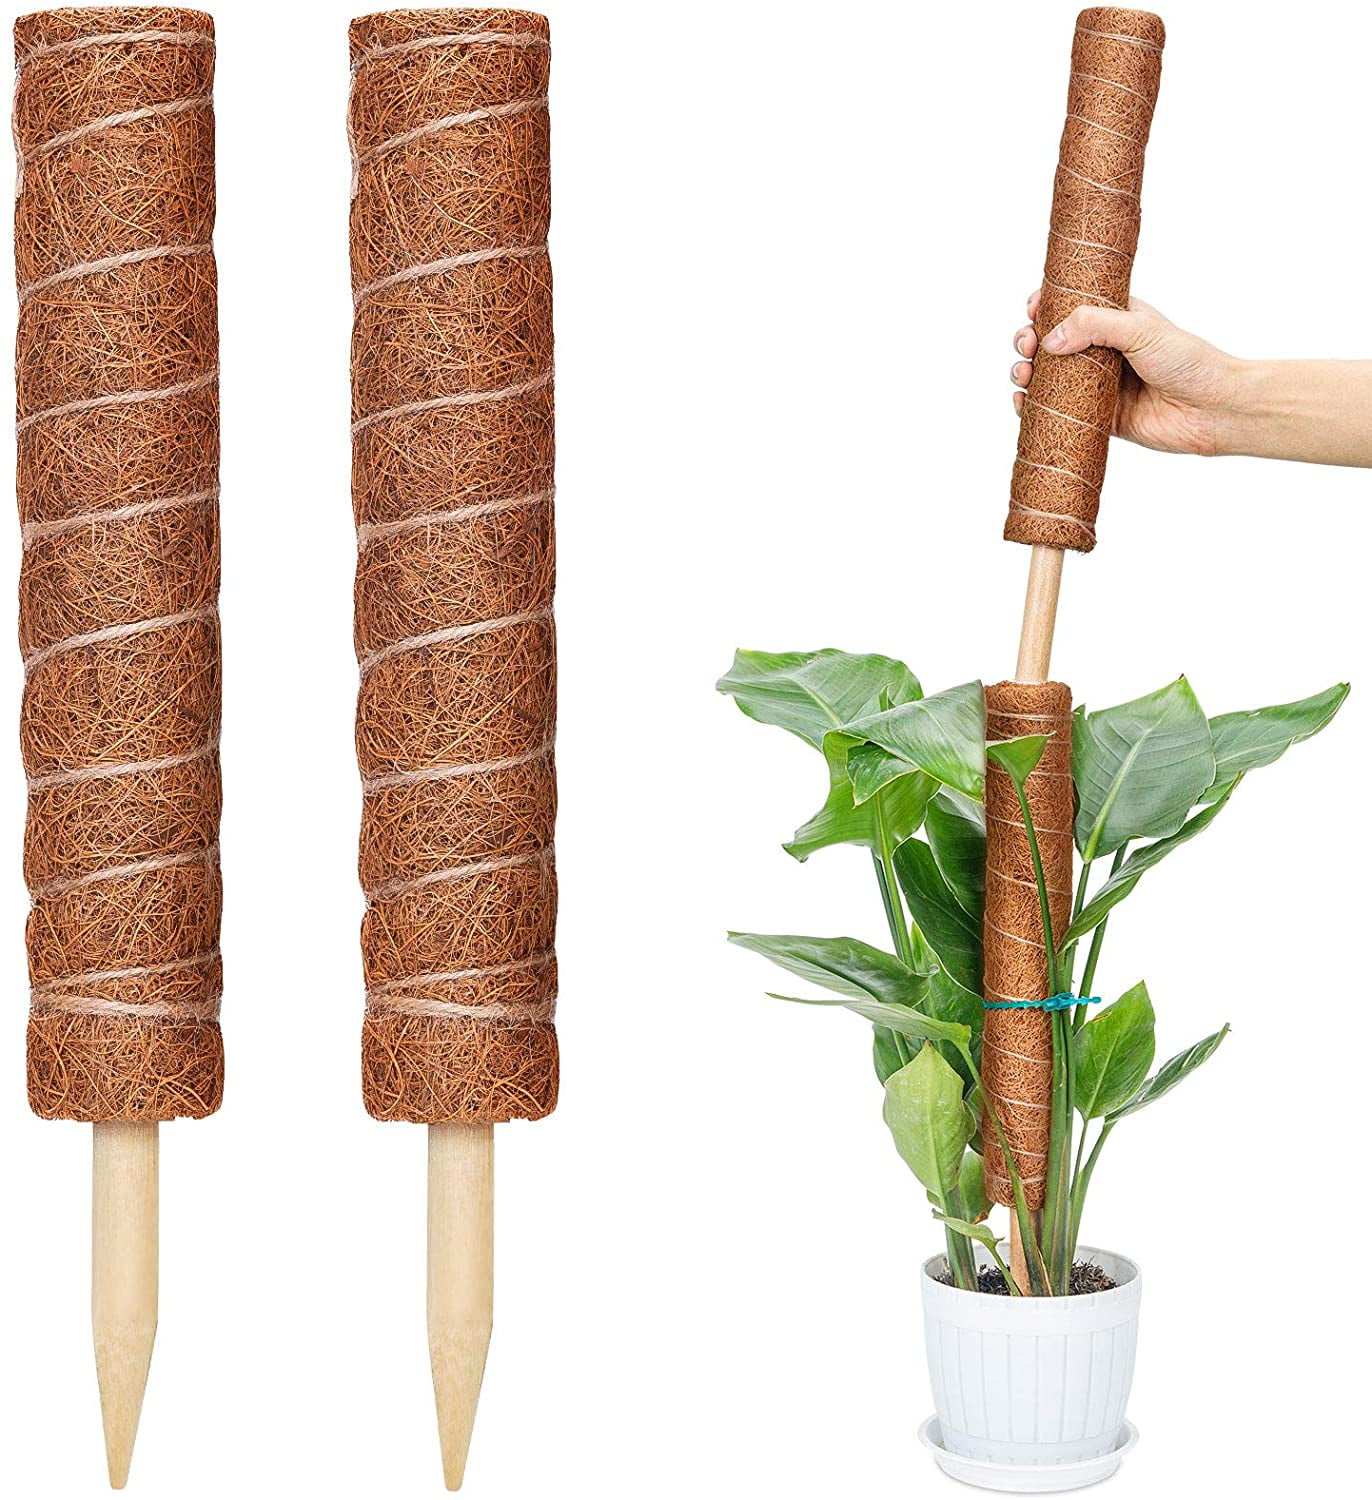 50CM/ 60CM/ 70CM/ 80CM Plant Support Totem Pole Plant Support Sticks for Creepers Plant Support Extension Climbing Indoor Plants Raspbery Coir Moss Pole 1PCS handy